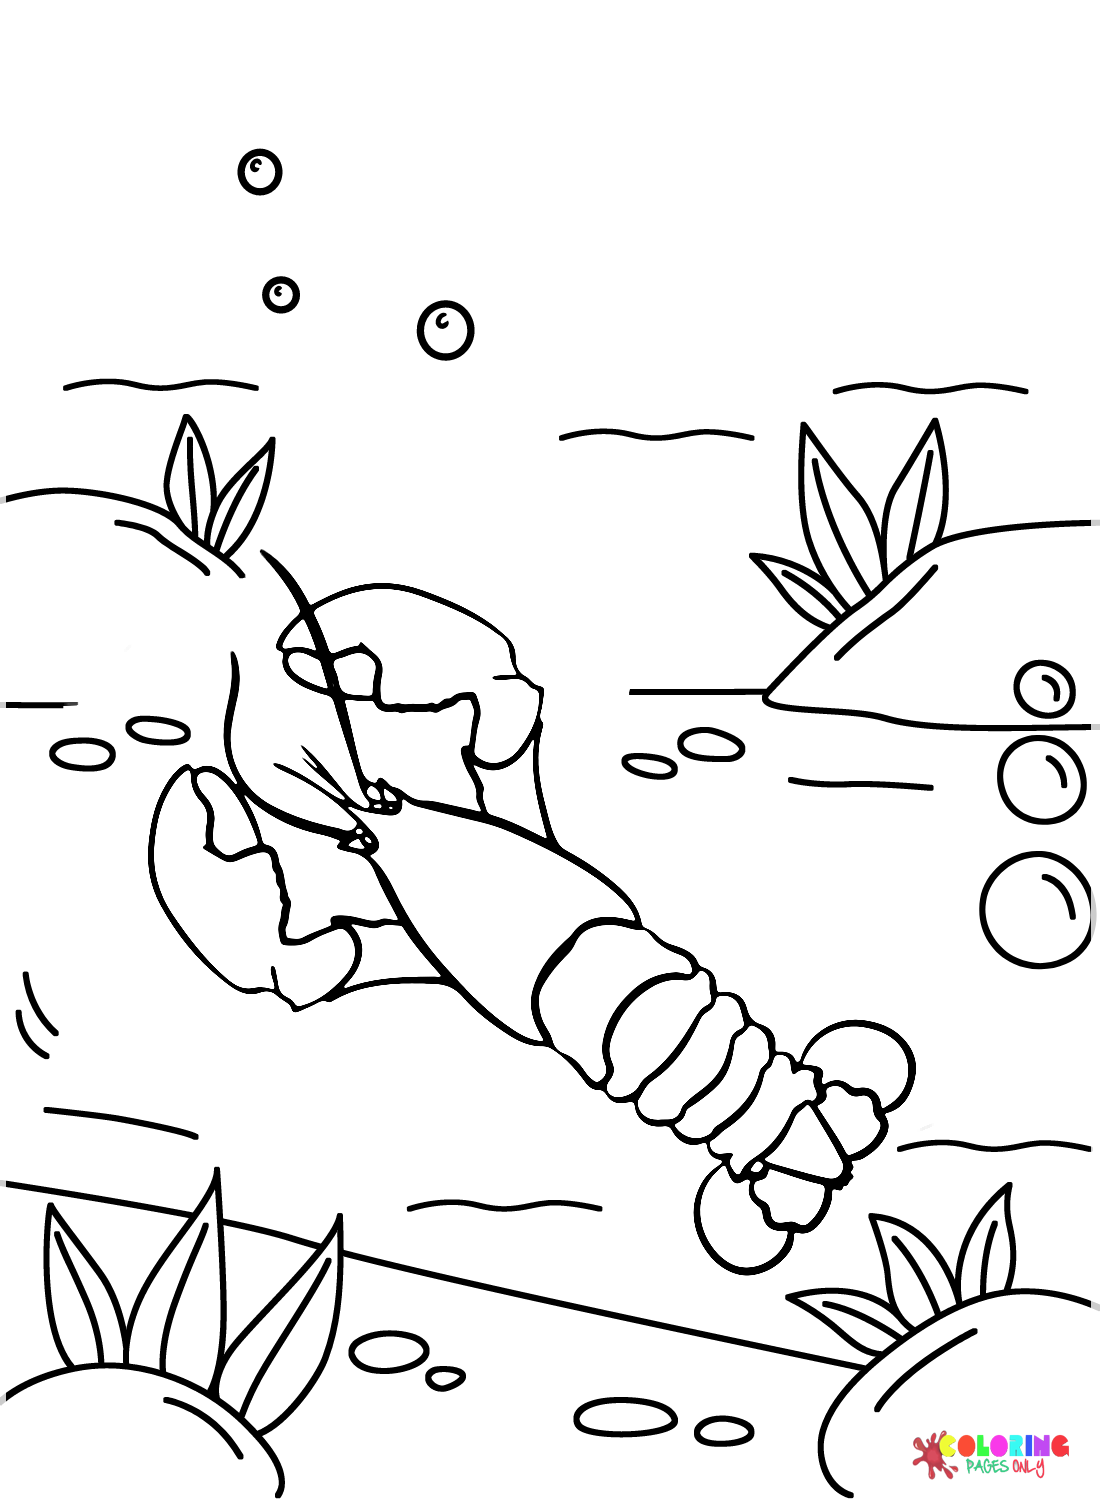 Lobster Pictures Coloring Page